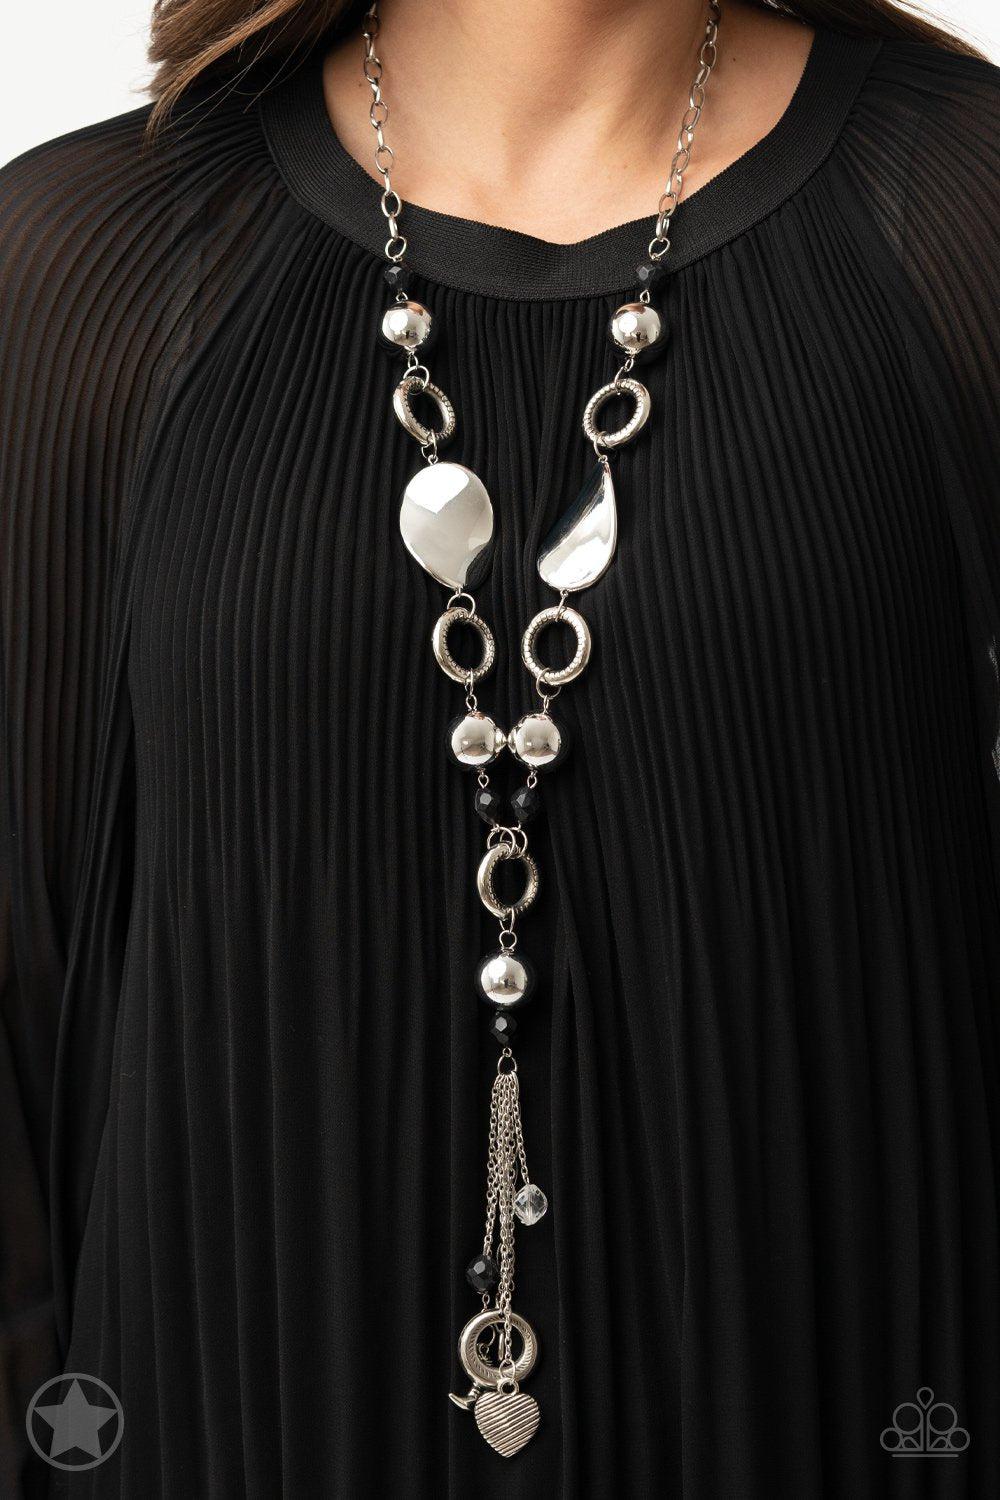 Total Eclipse of the Heart Long Silver Tassel Necklace and matching Earrings - Paparazzi Accessories - model -CarasShop.com - $5 Jewelry by Cara Jewels